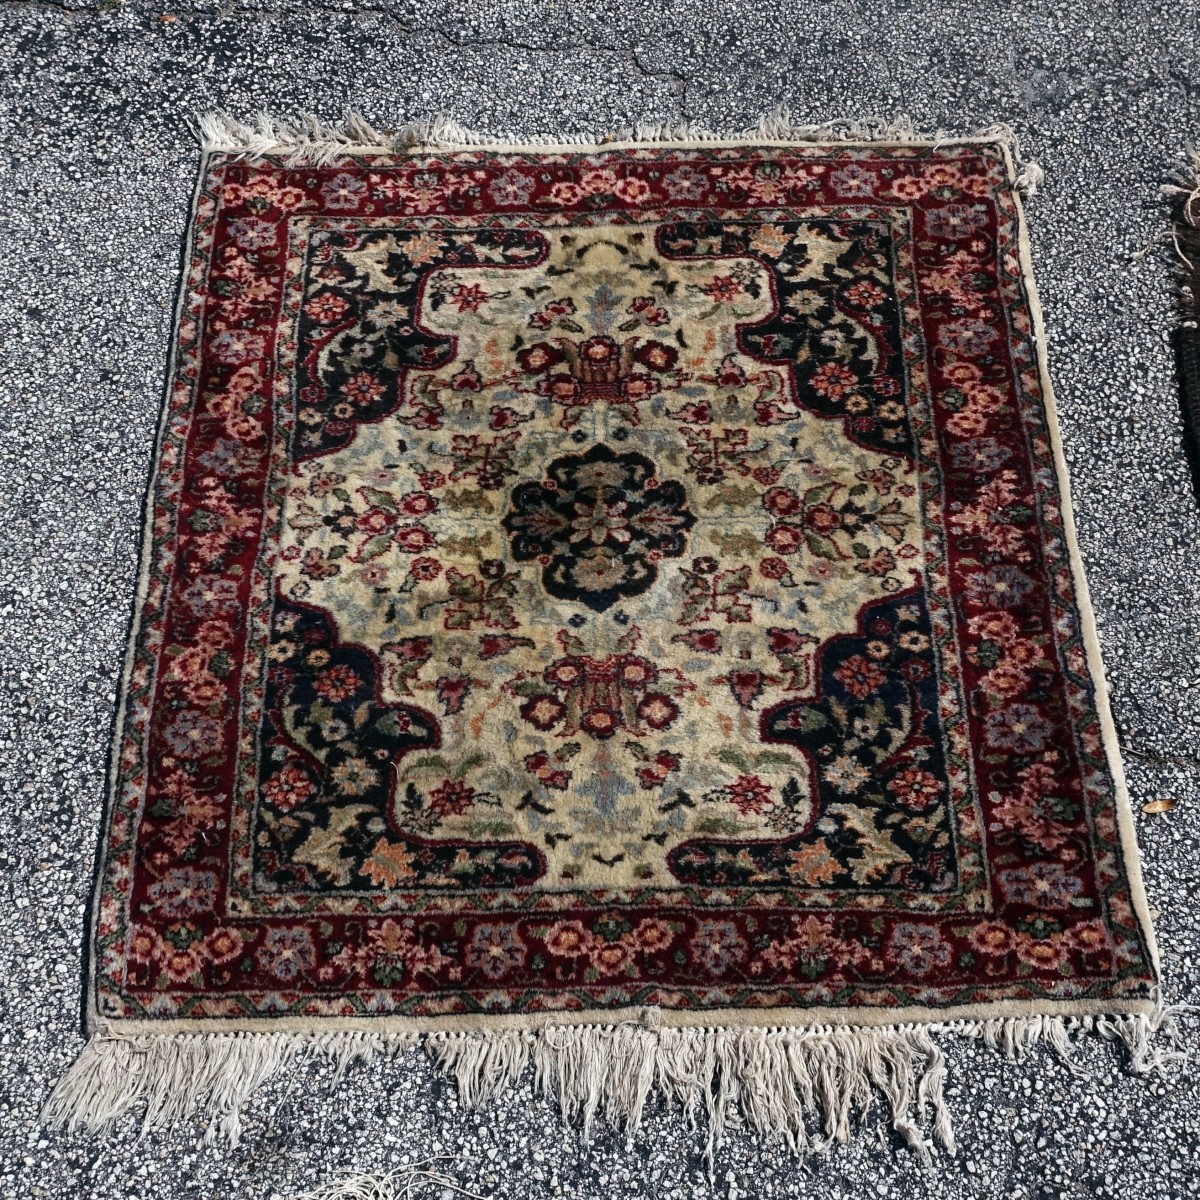 Three Middle Eastern Rugs